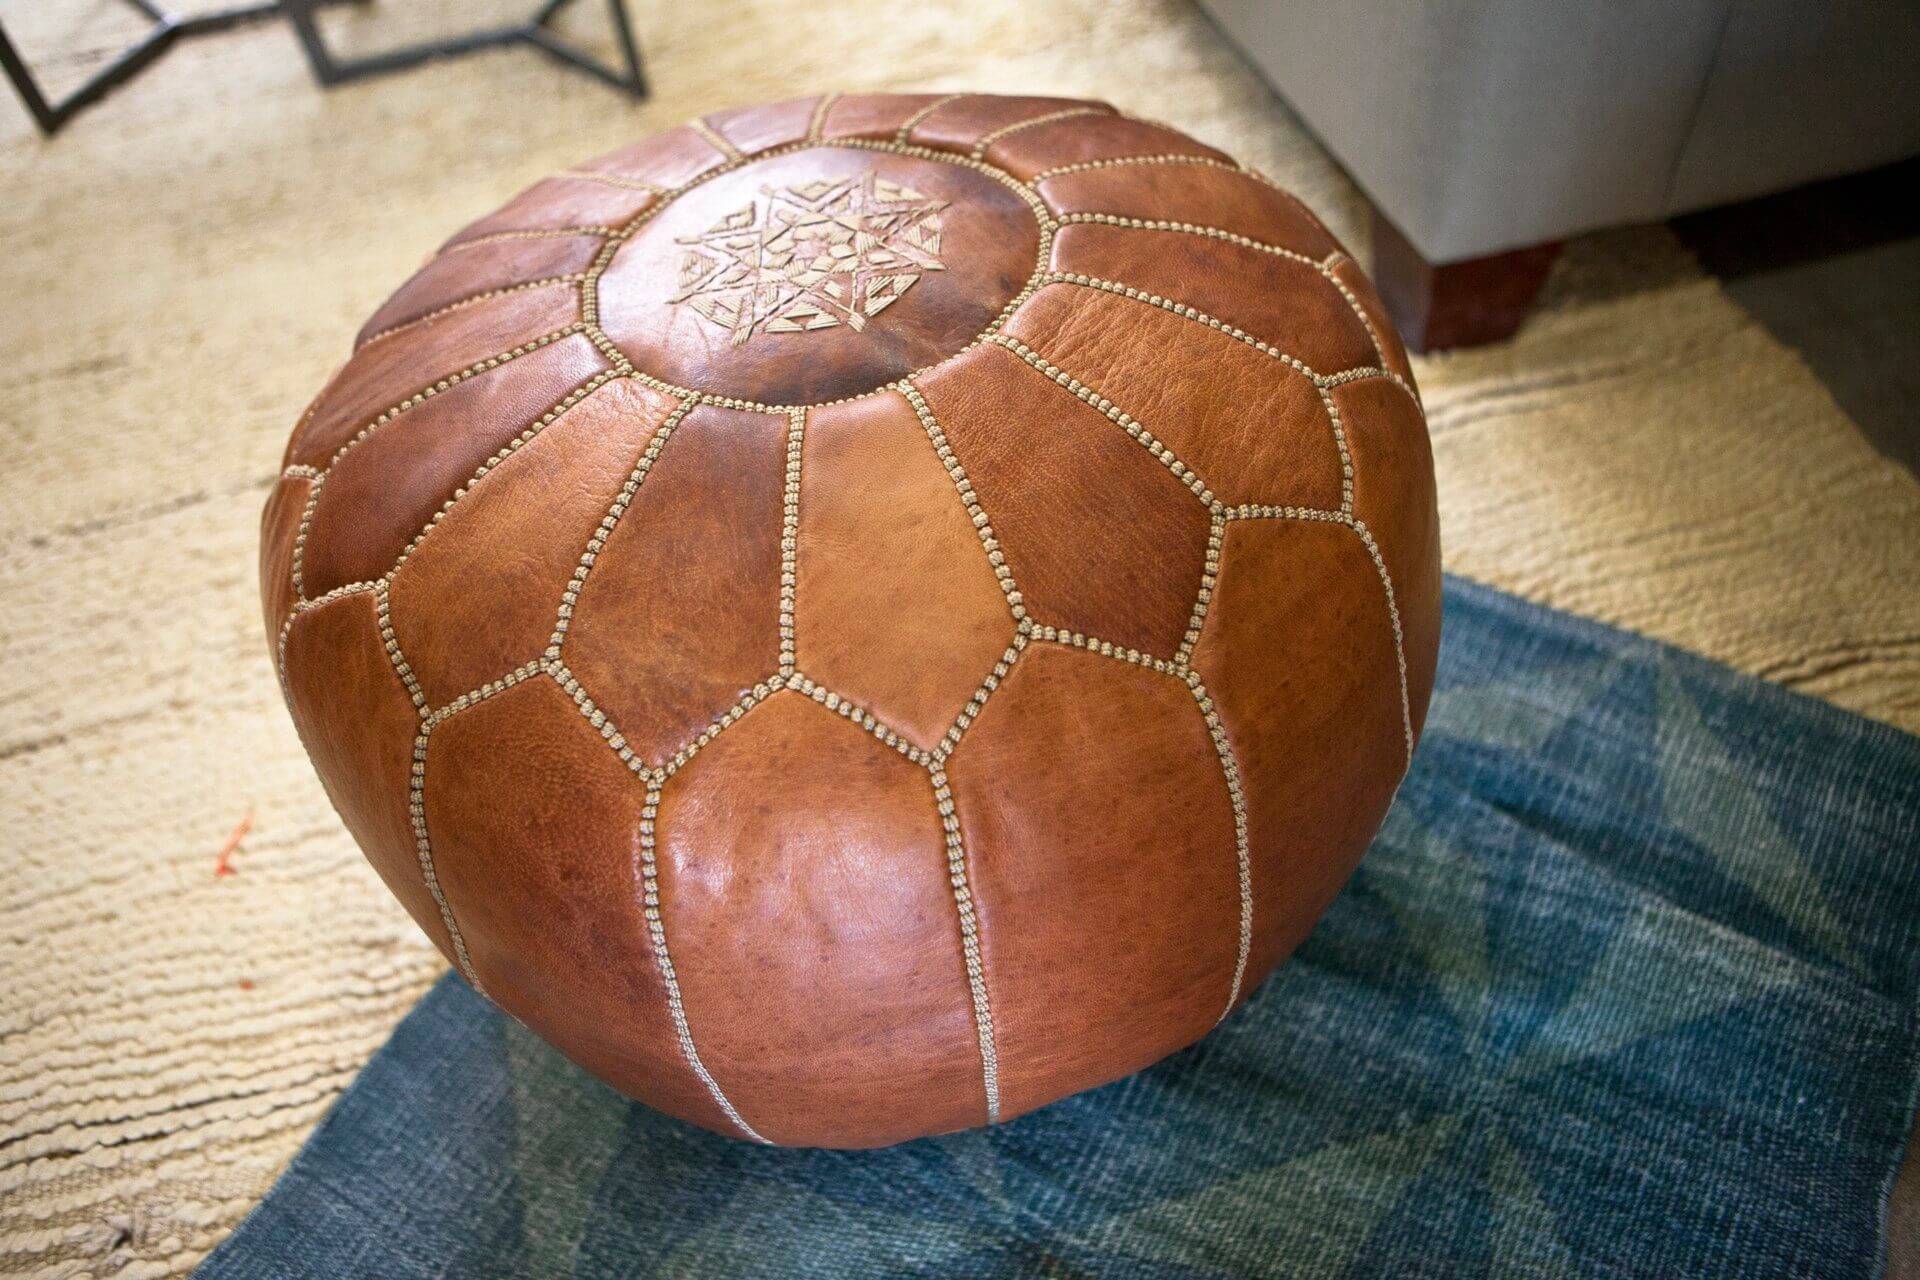 poufs 1 - MOROCCAN POUFS: EVERYTHING YOU NEED TO KNOW